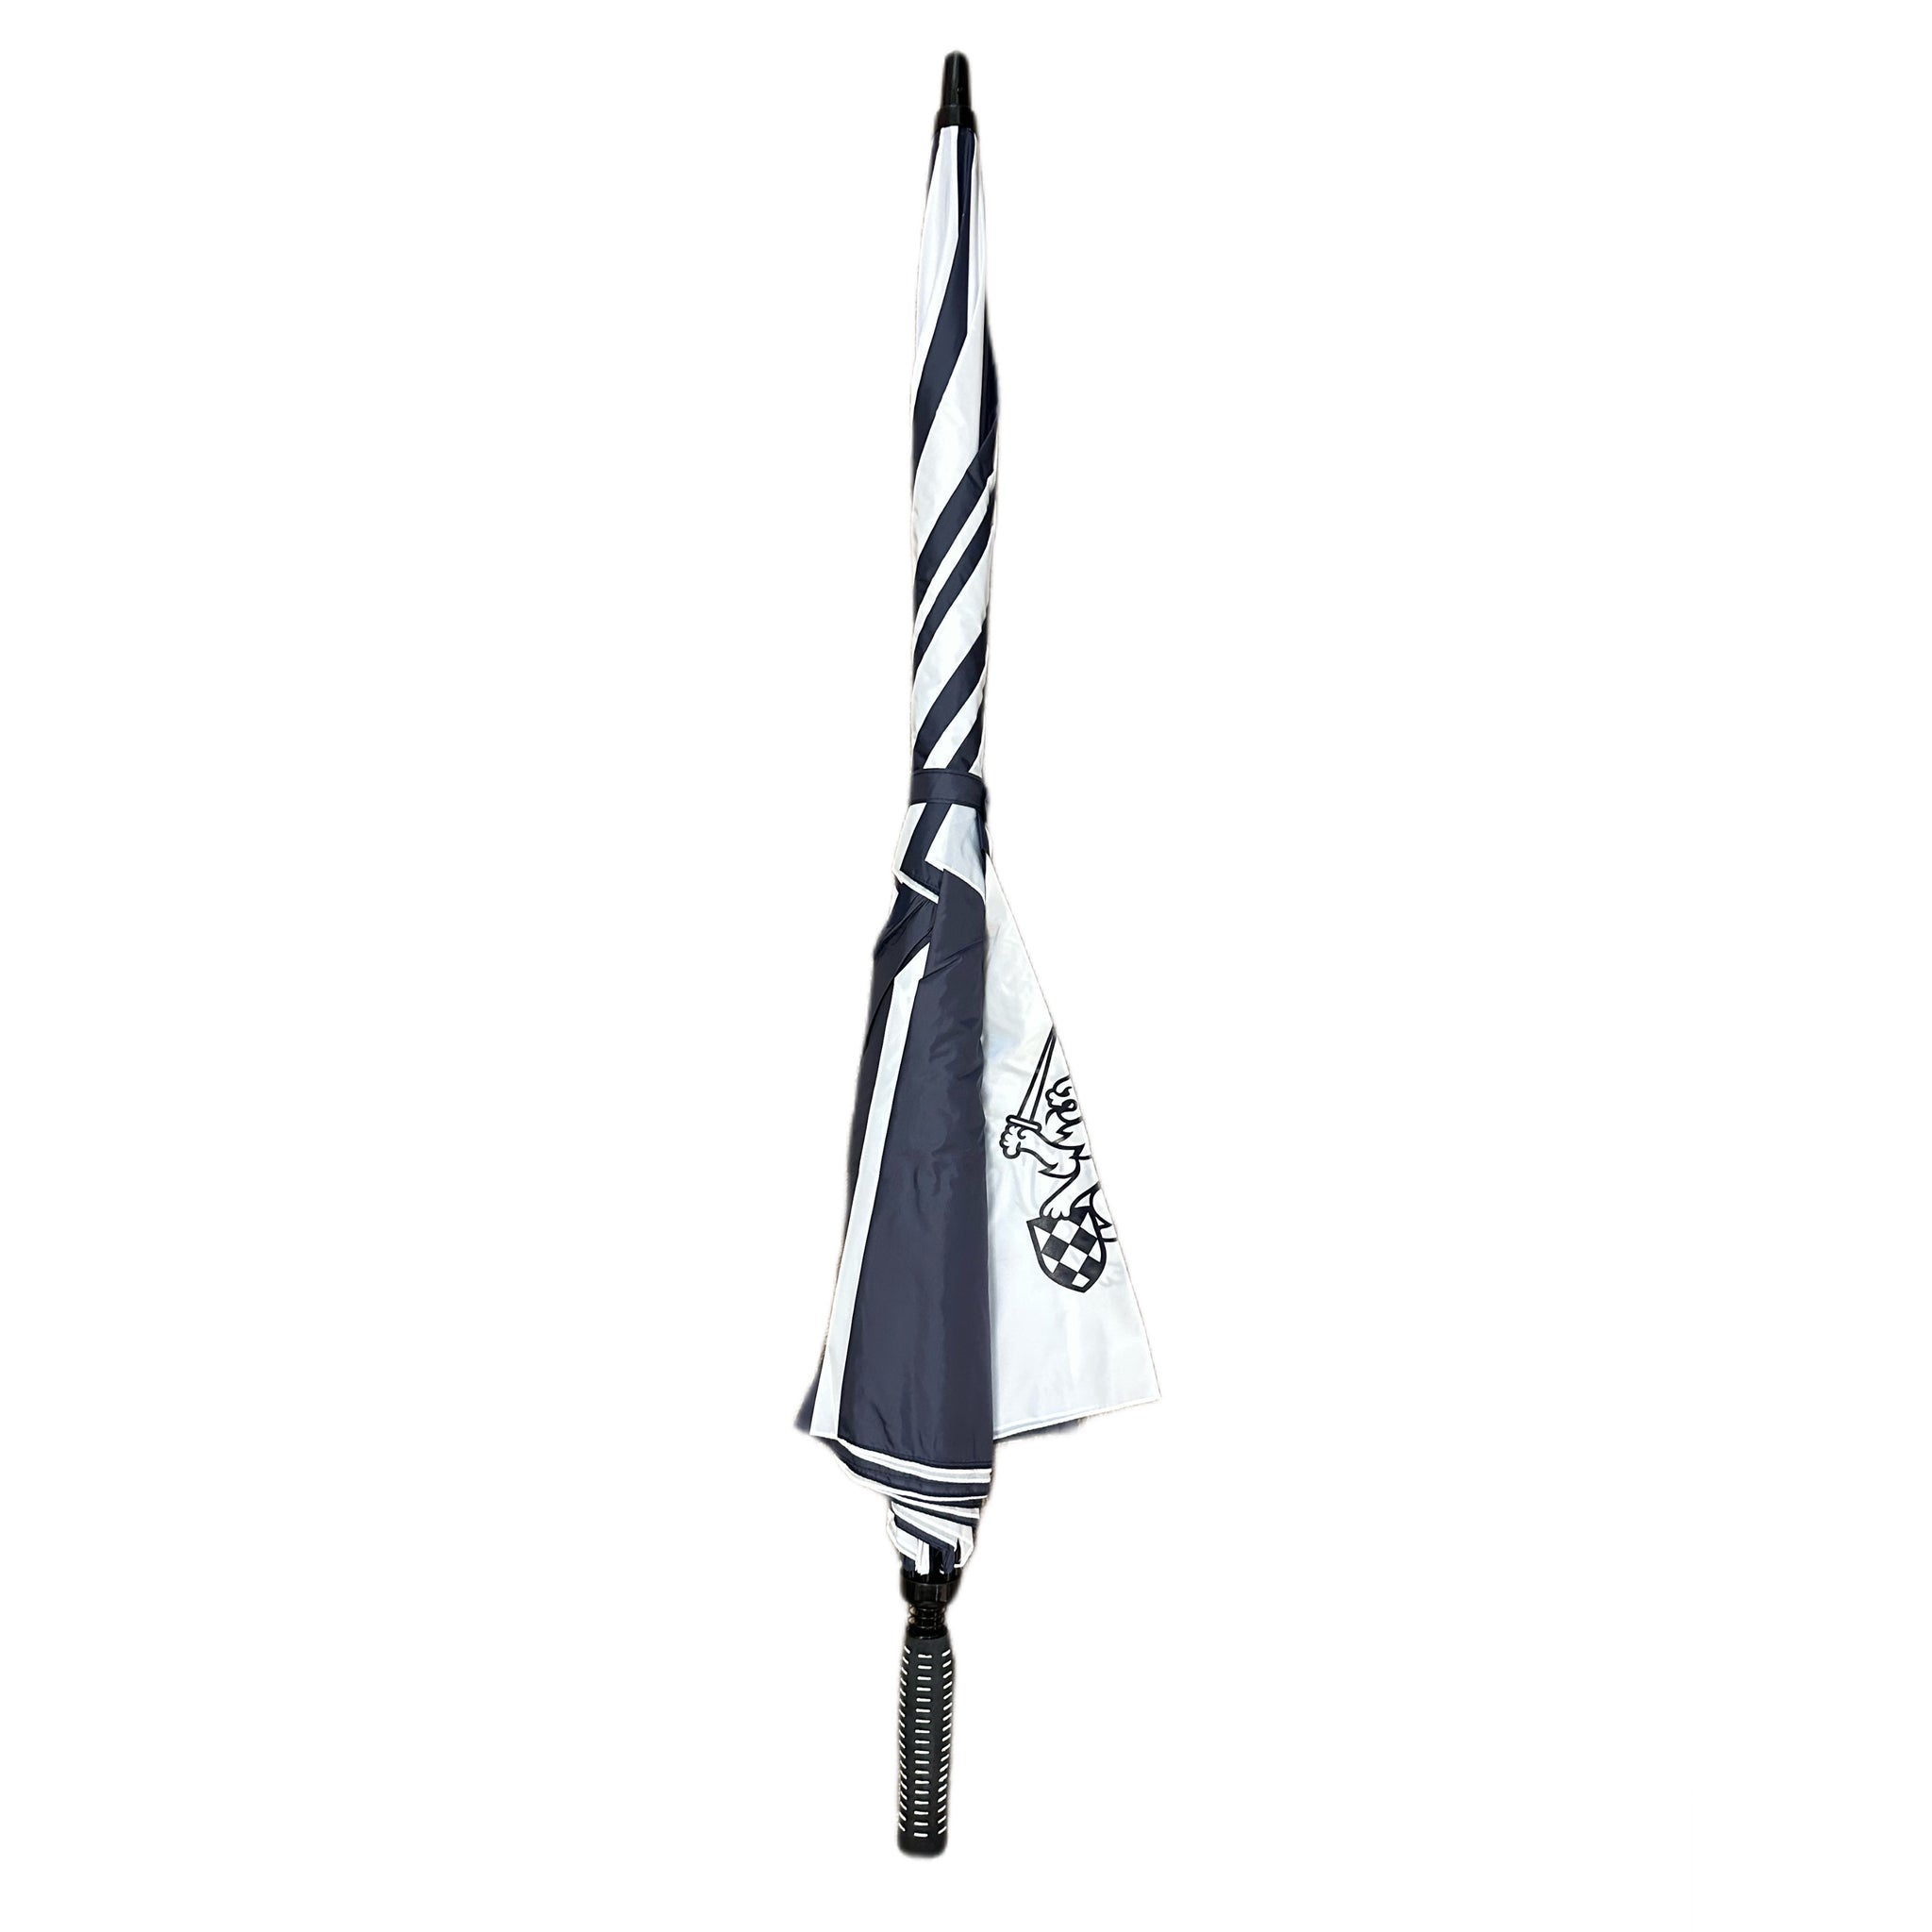 Umbrella Golf Vented Navy and White